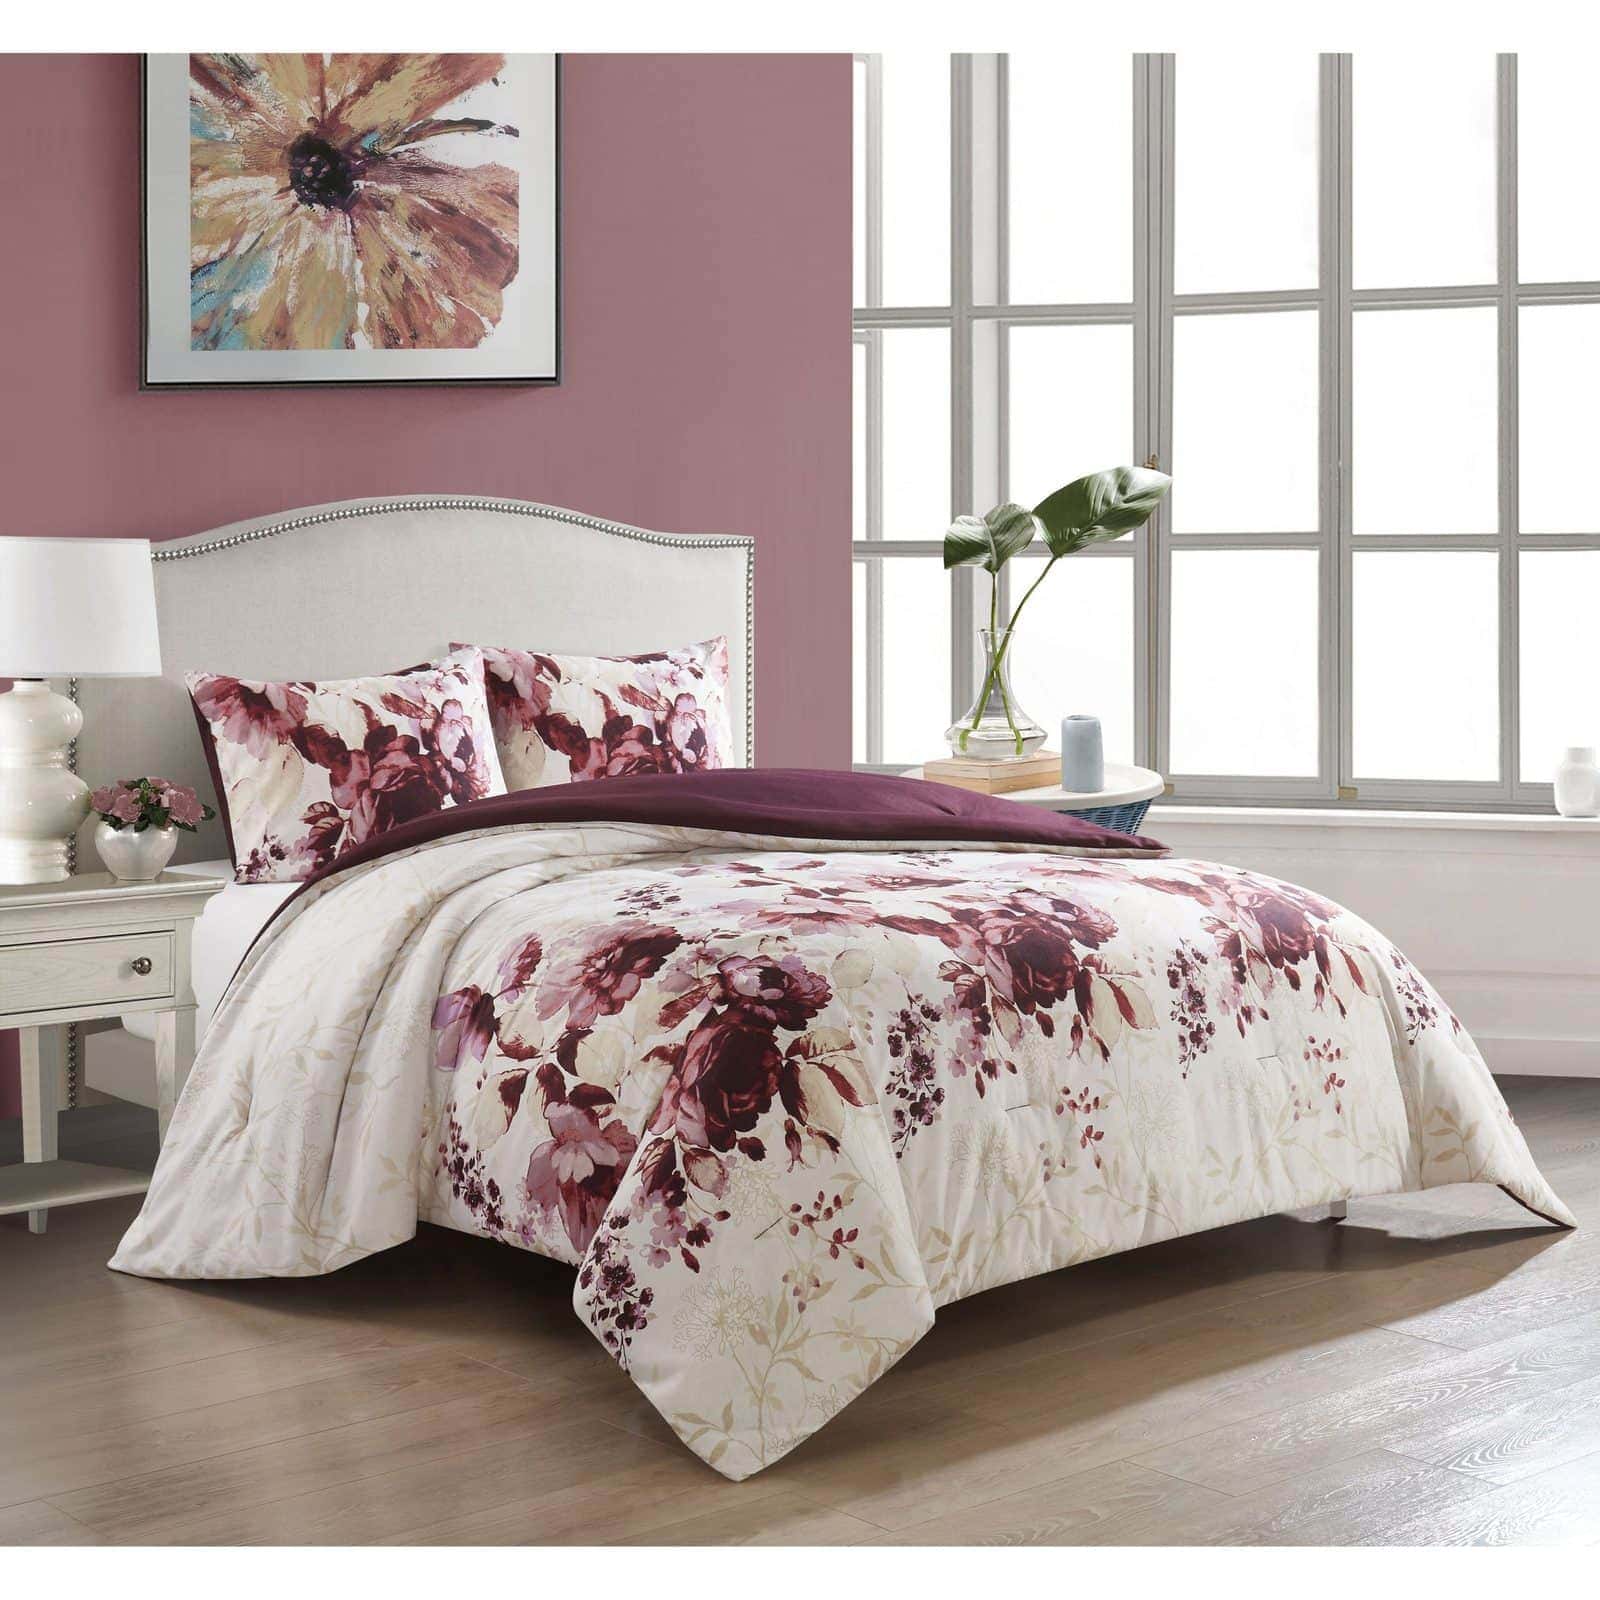 Create a Feminine Bedroom With Violet and Ivory White